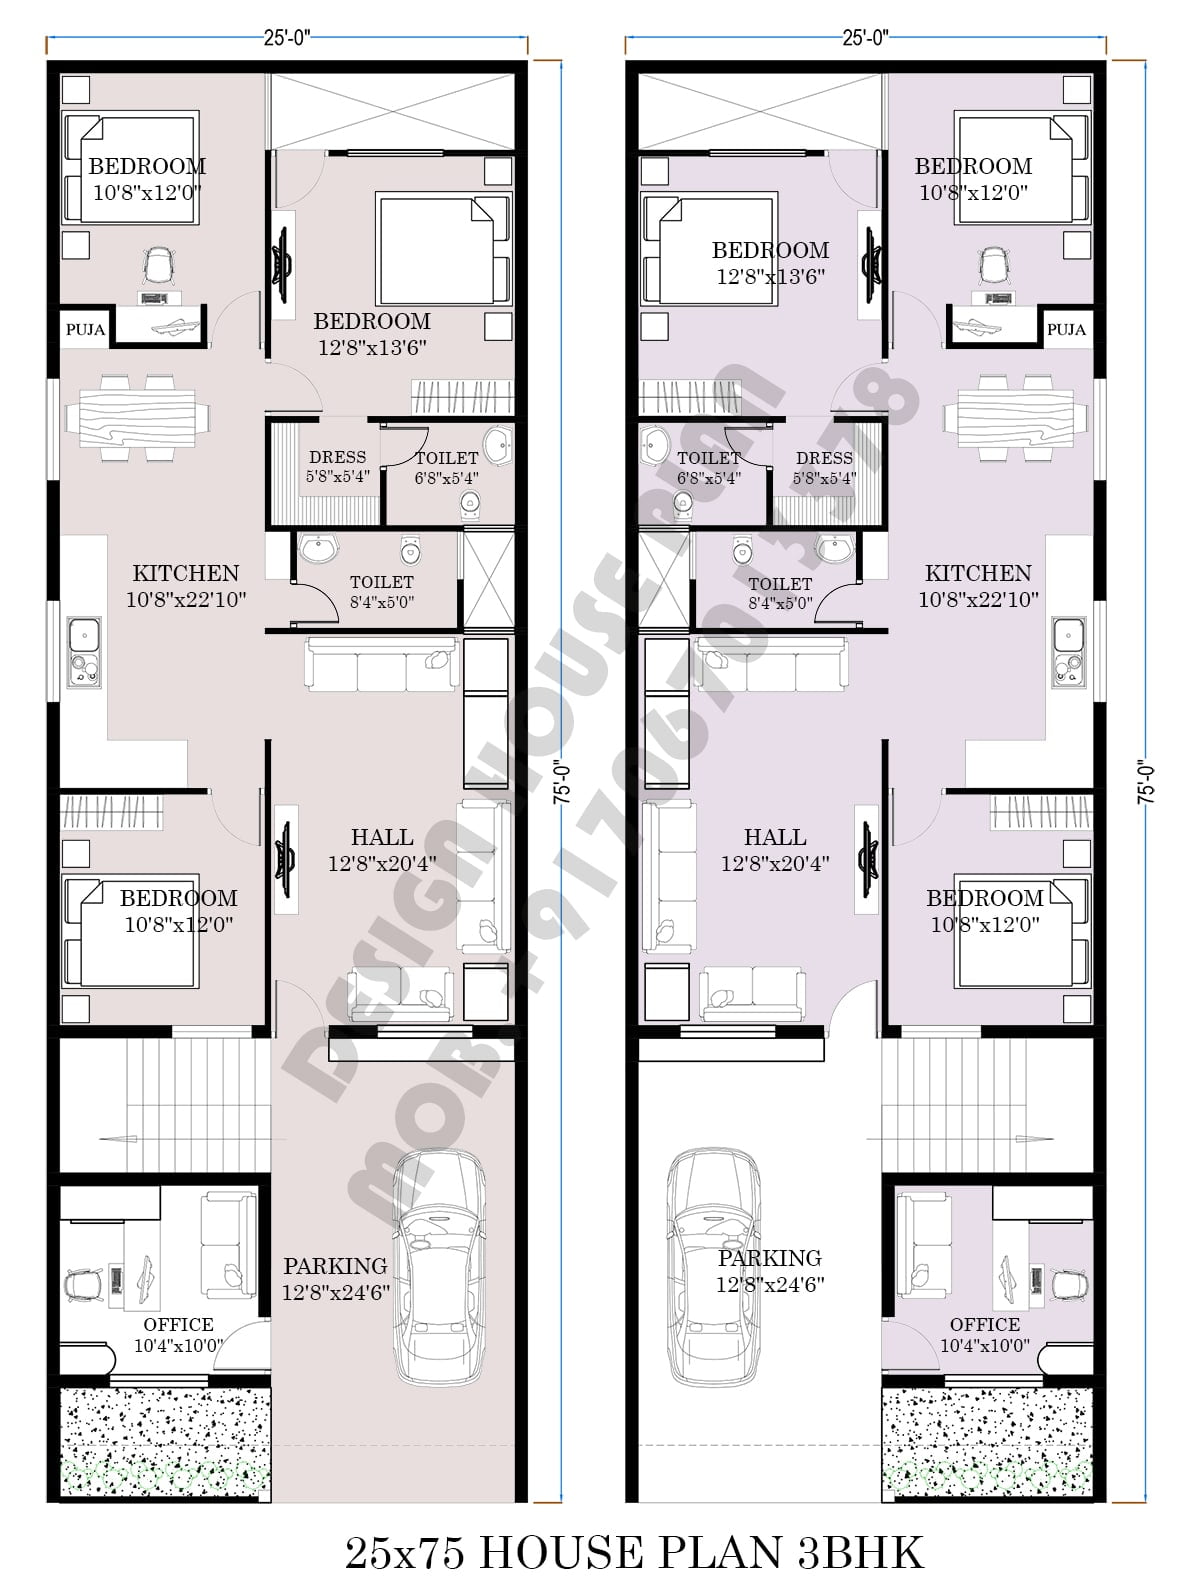 25 75 house plans 3 bedrooms with parking